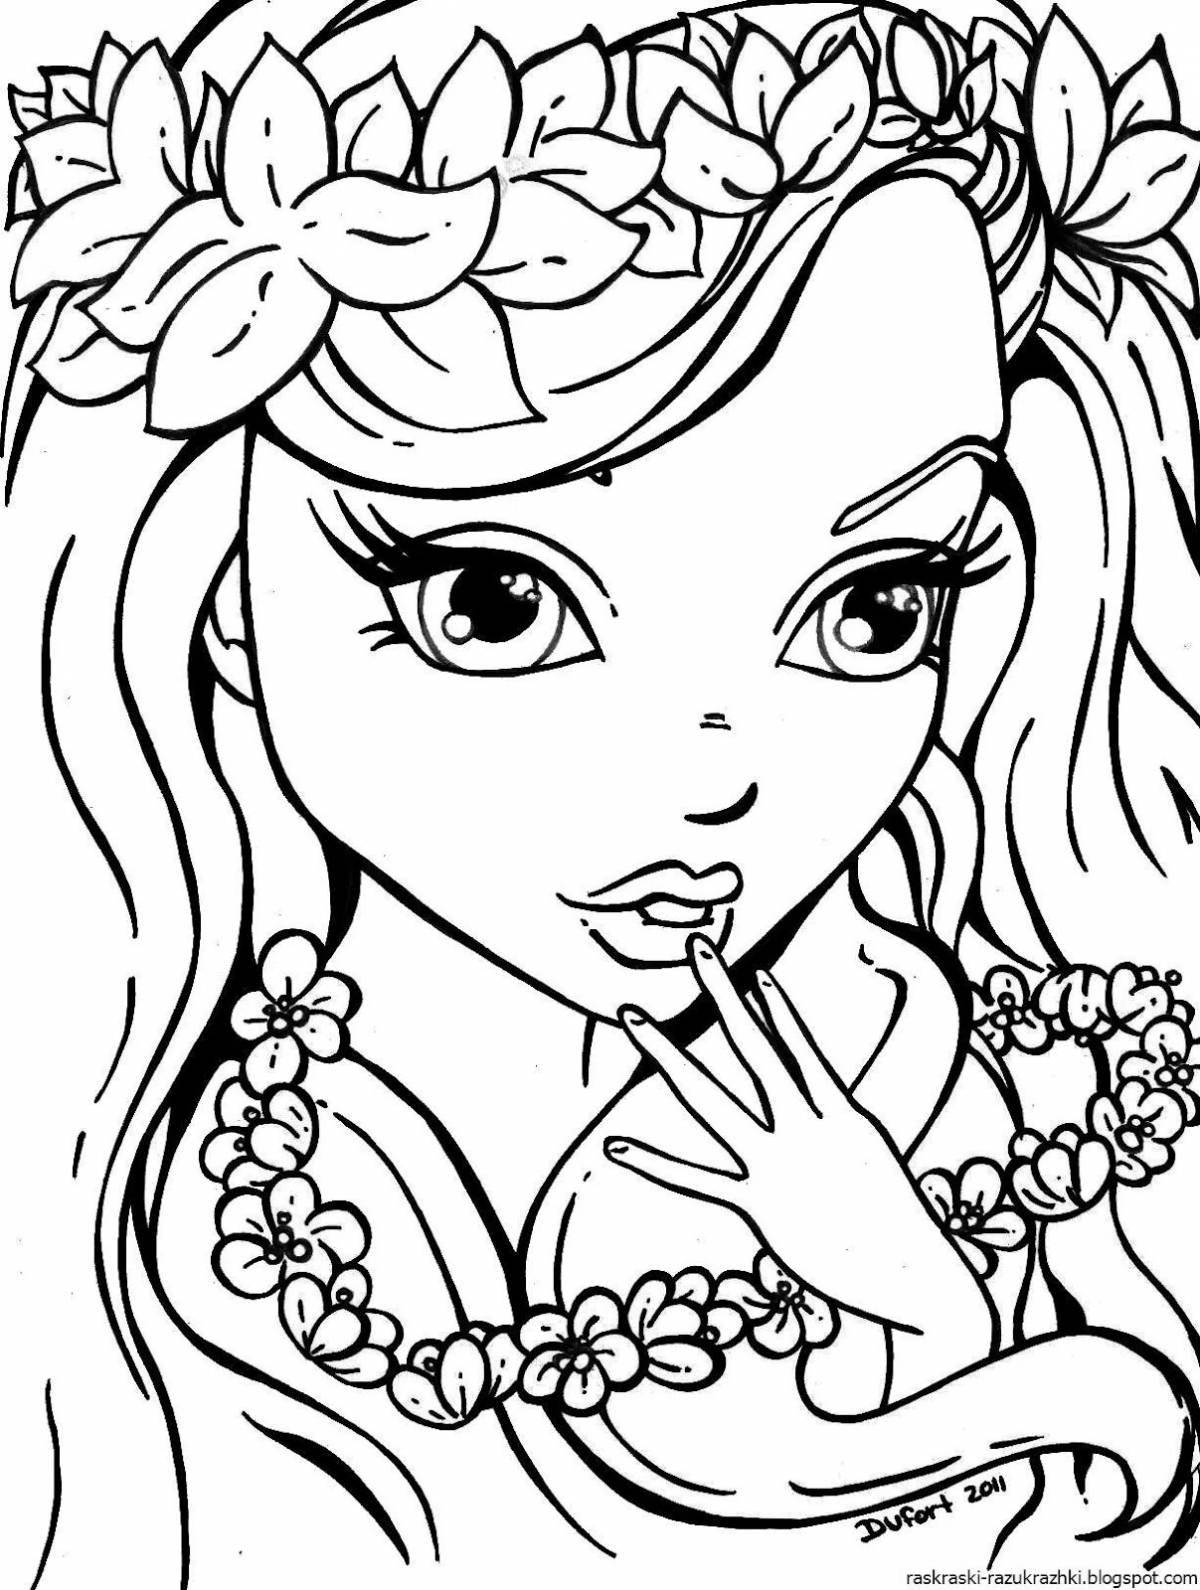 Delightful coloring book for girls